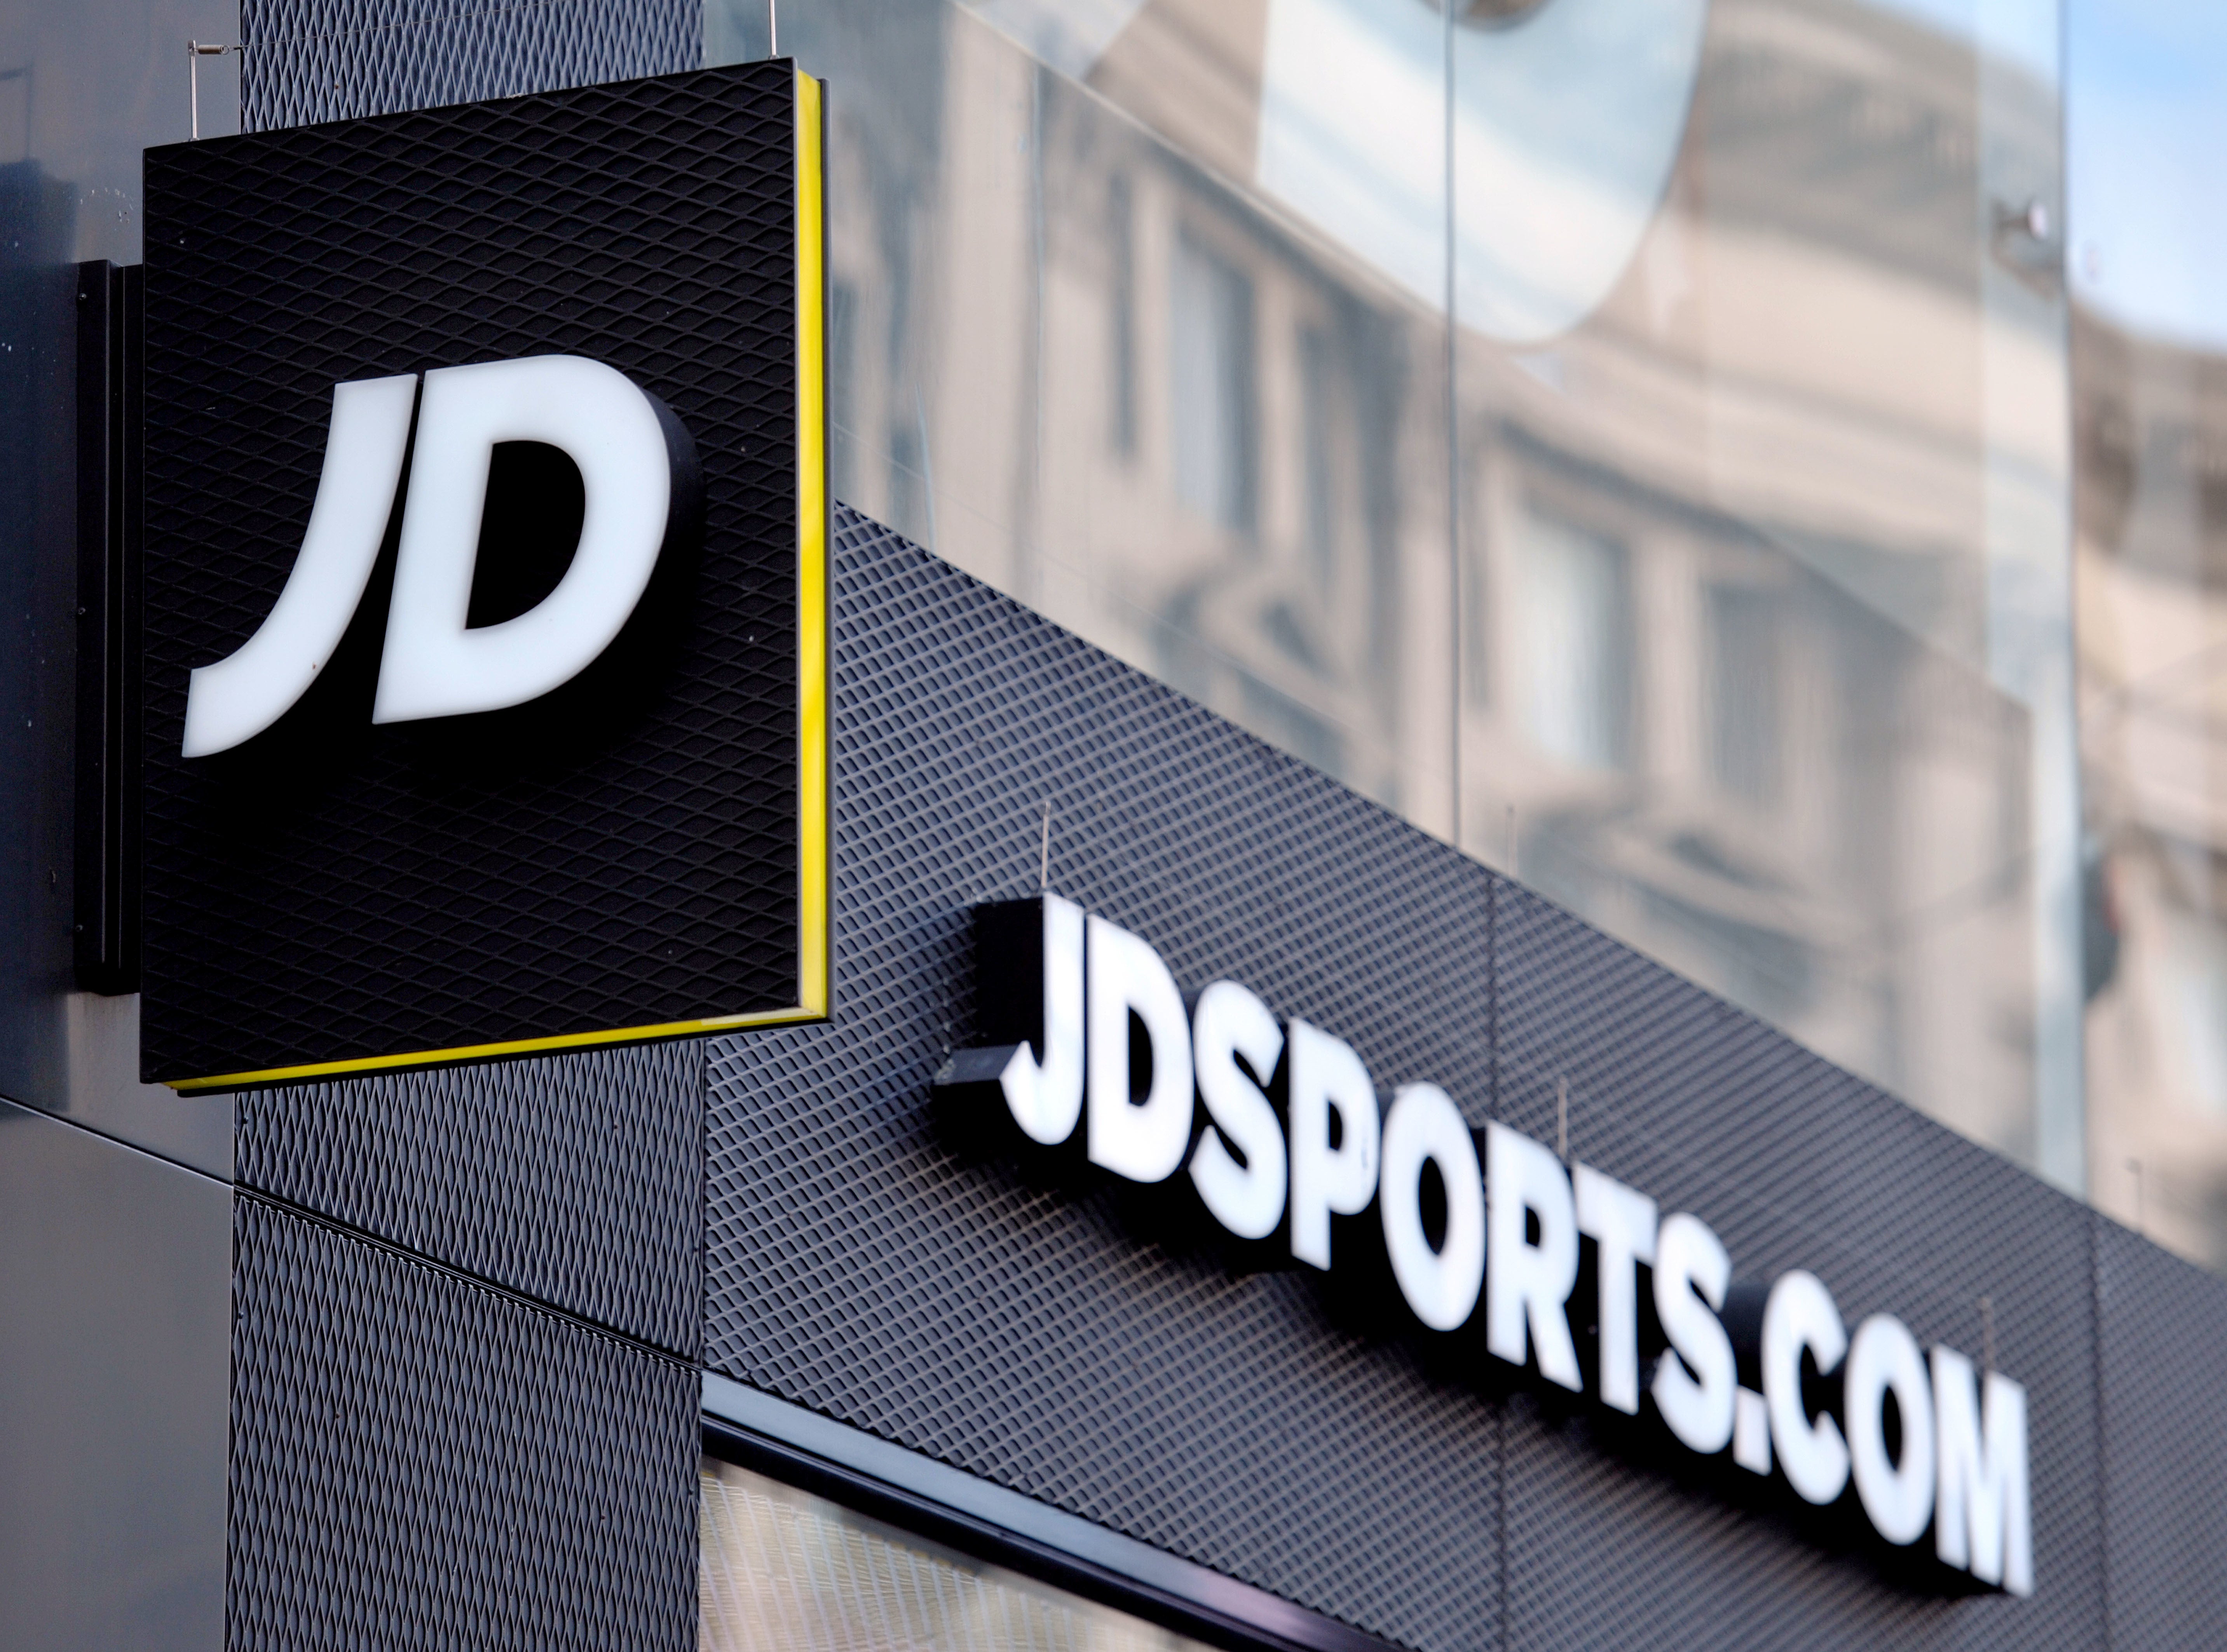 JD Sports received a fine of £1.48 million (Nick Ansell/PA)